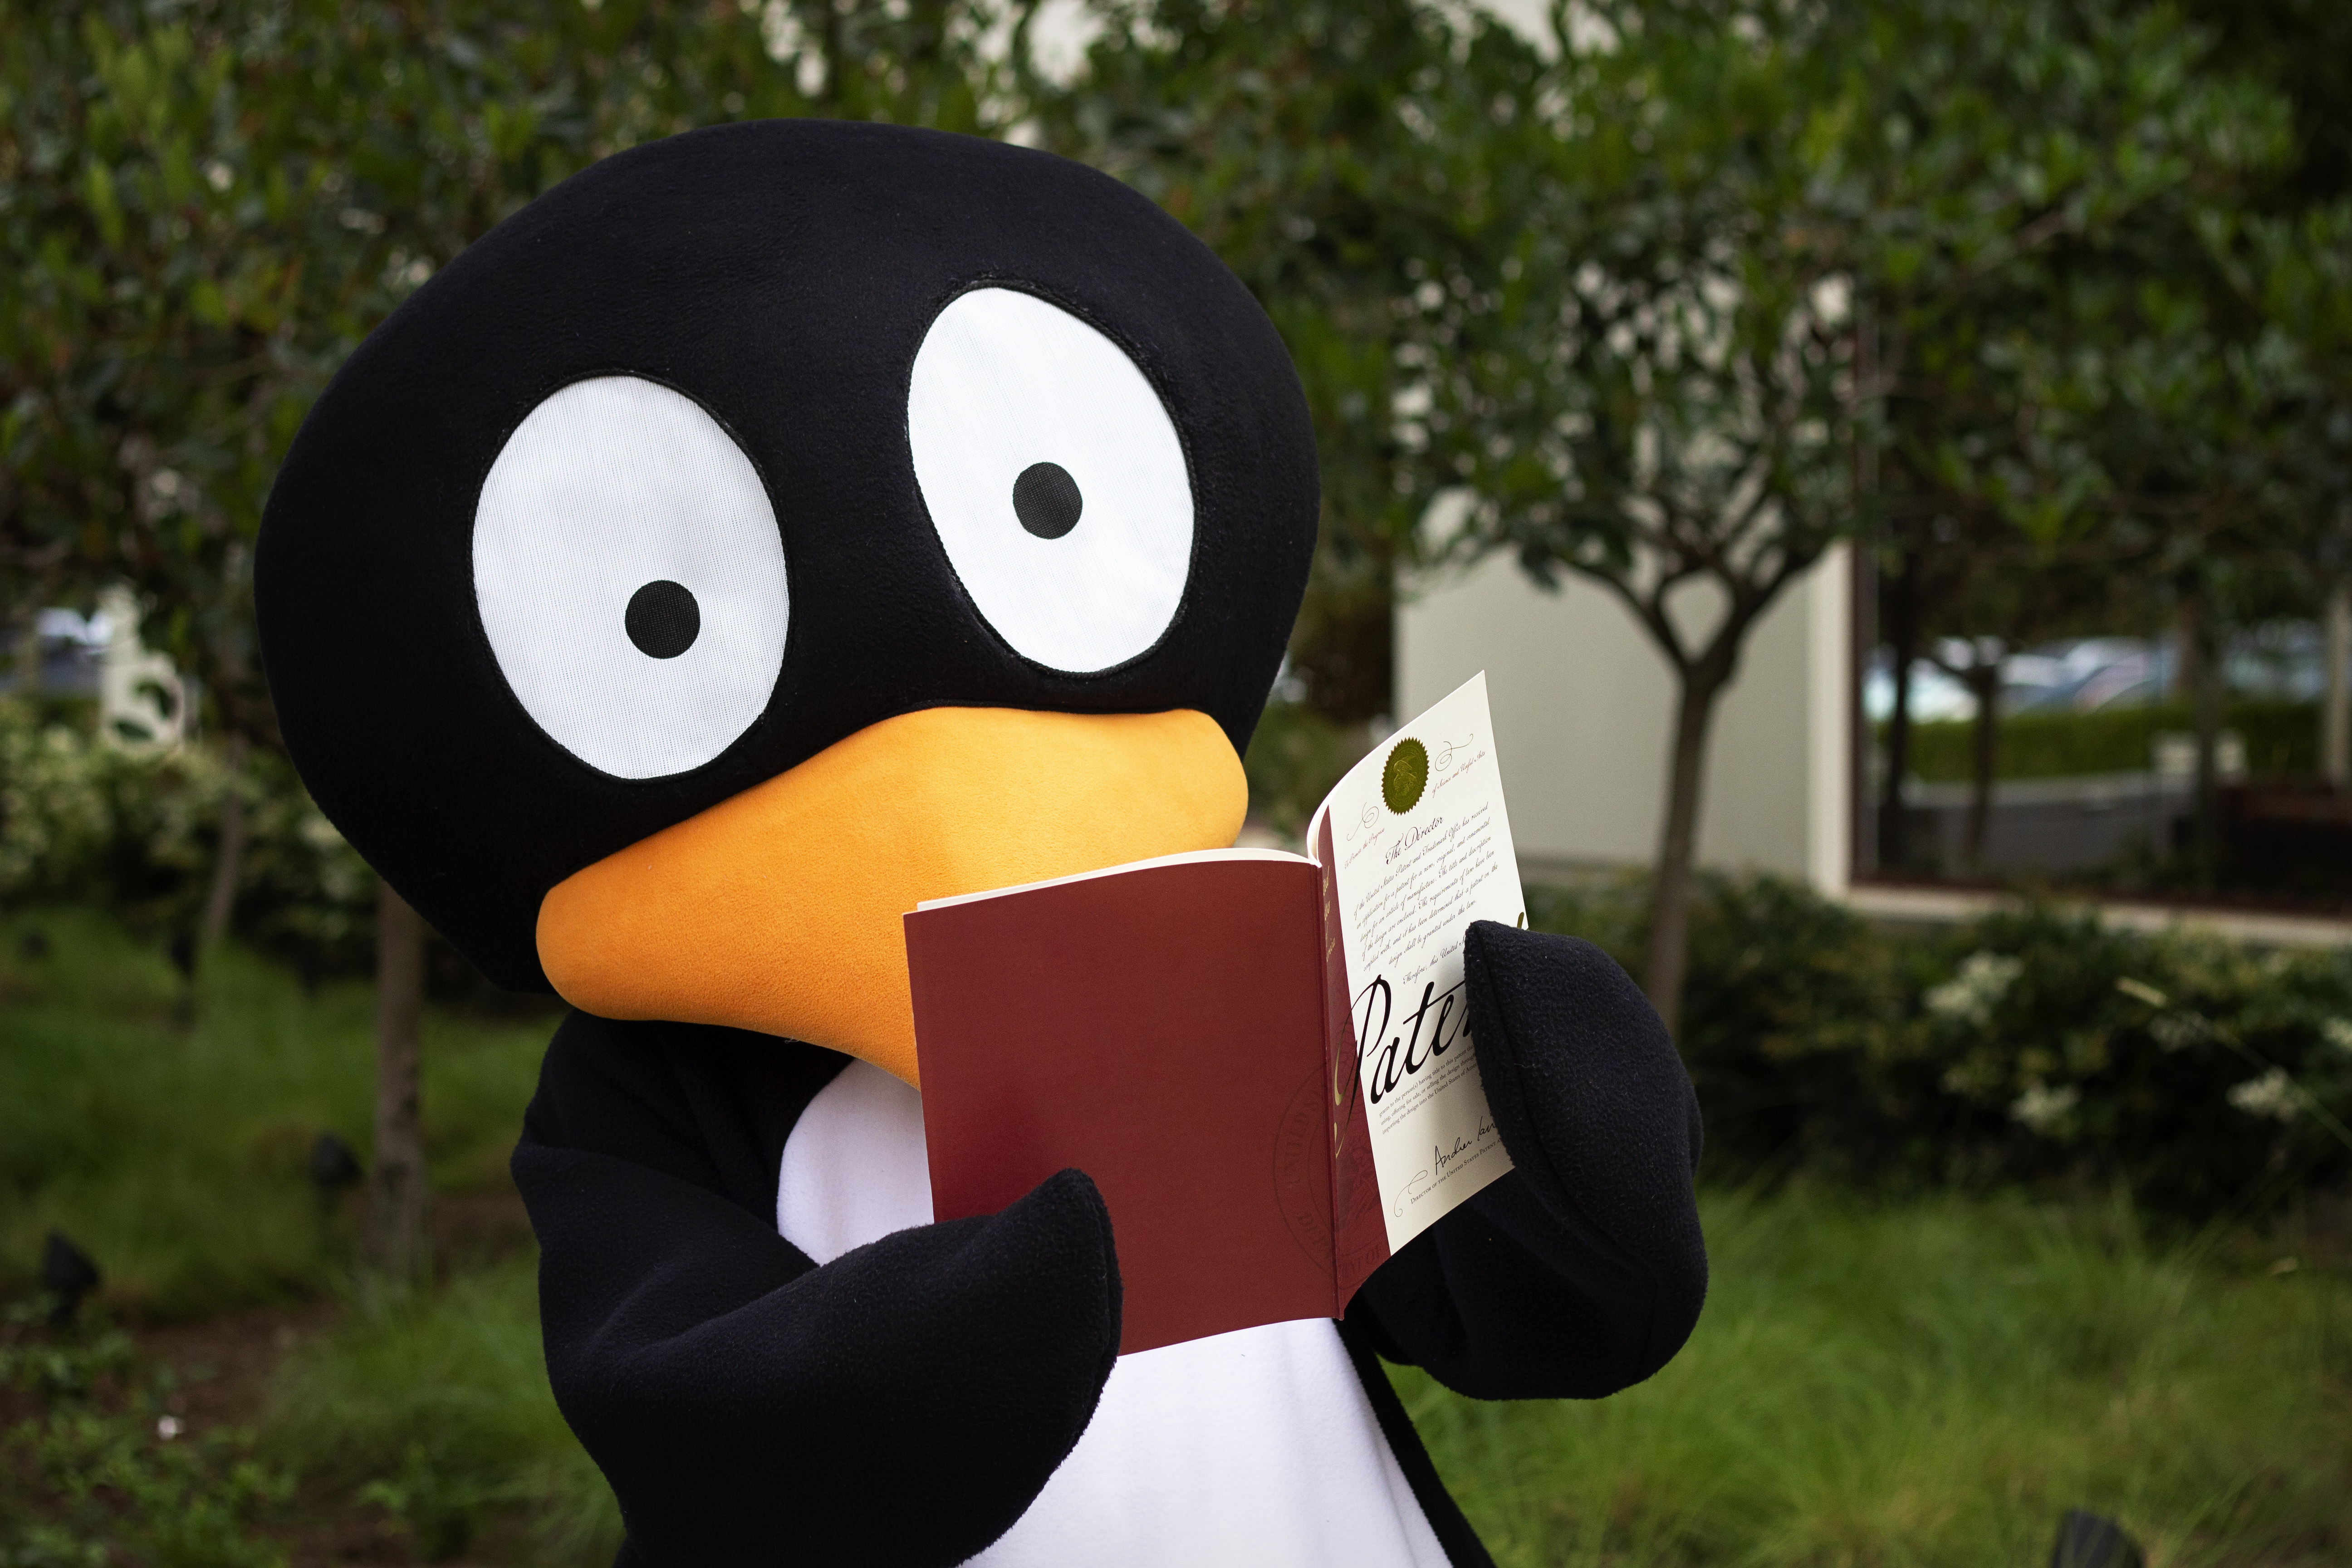 JiJi, beloved ST Math mascot, holds MIND’s latest patent on spatial-temporal teaching approach.